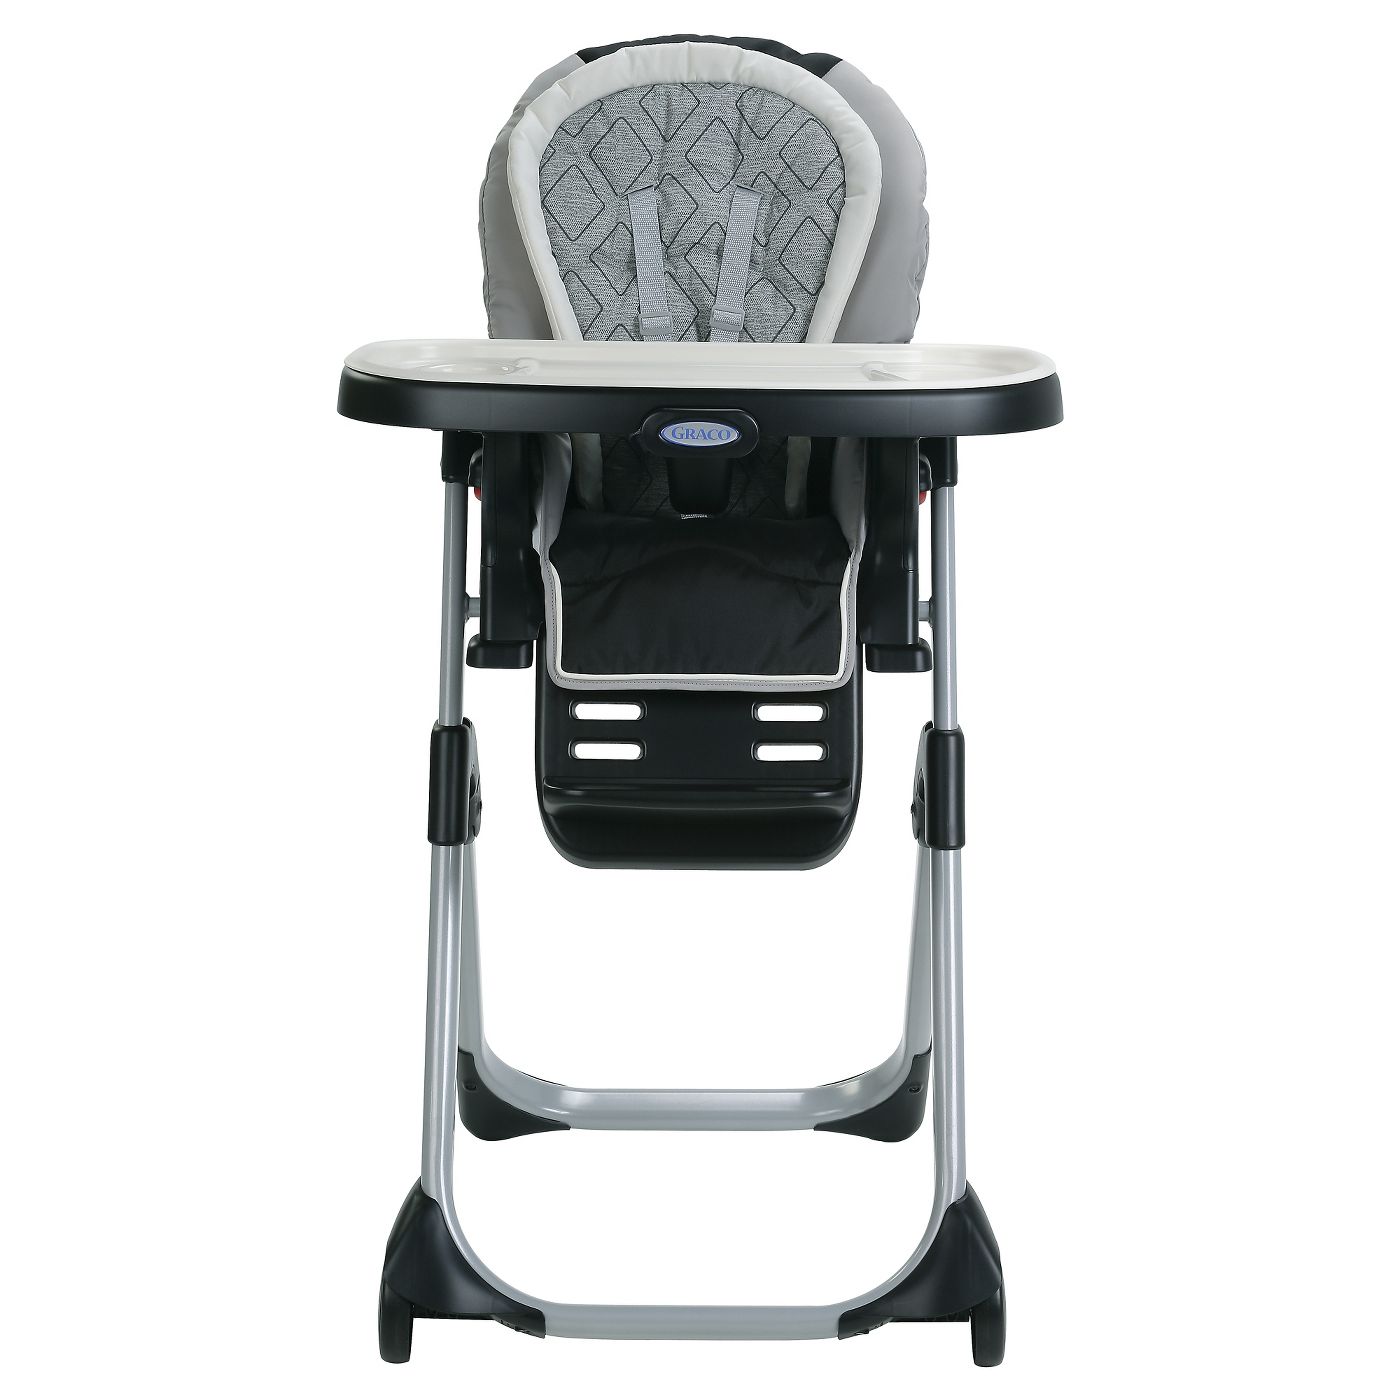 Kids Deals Graco Duodiner 3 In 1 Convertible High Chair 95 99